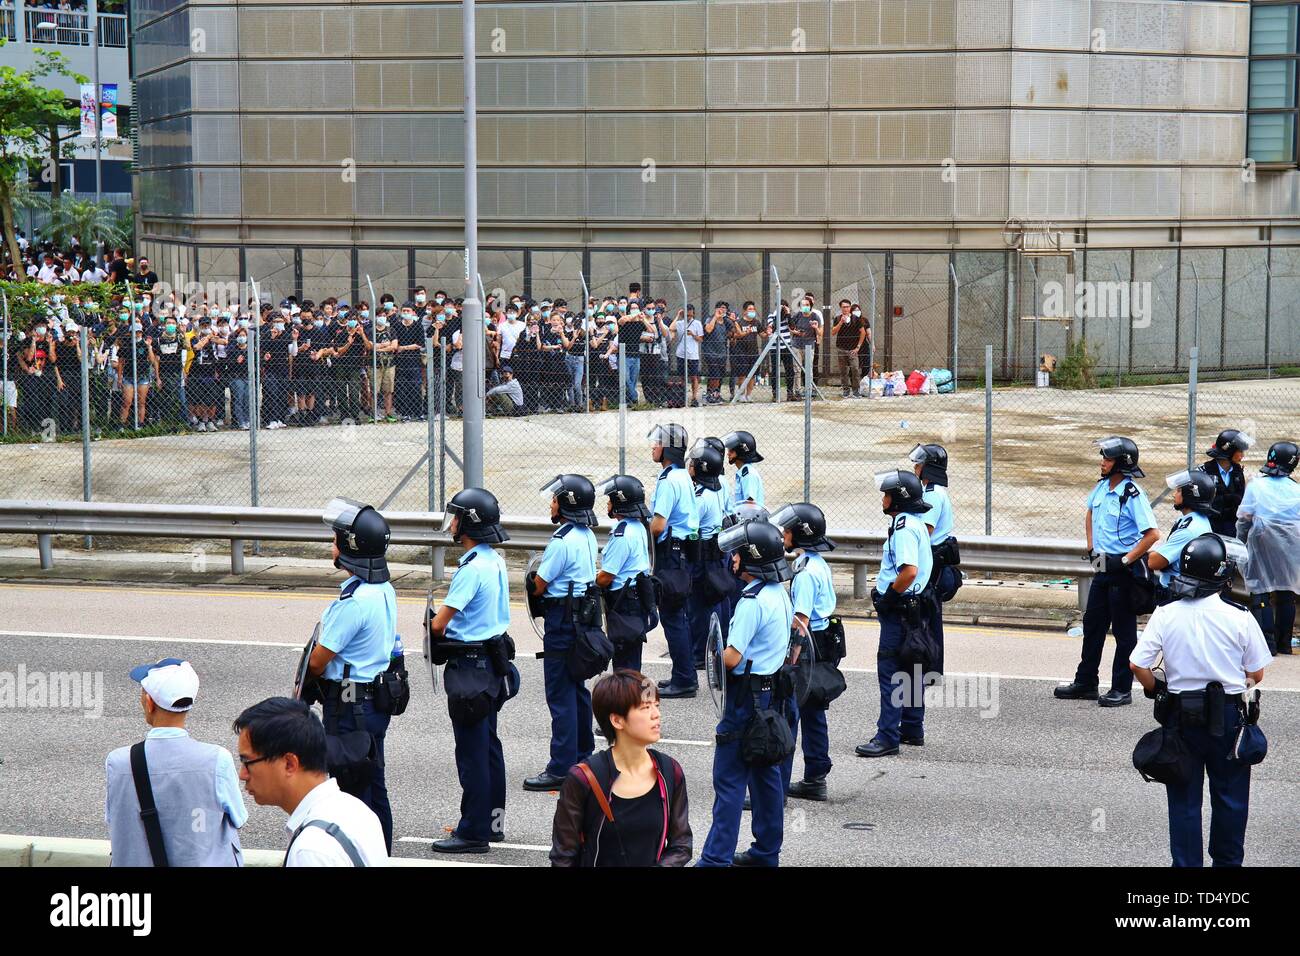 Hong Kong. 12th June, 2019. Hong Kong - June 12, 2019. Thousands of protesters have surrounded government buildings in Hong Kong in protest of a controversial extradition bill. The police is setting up control barriers at Harcourt Road. Credit: Gonzales Photo/Alamy Live News Stock Photo